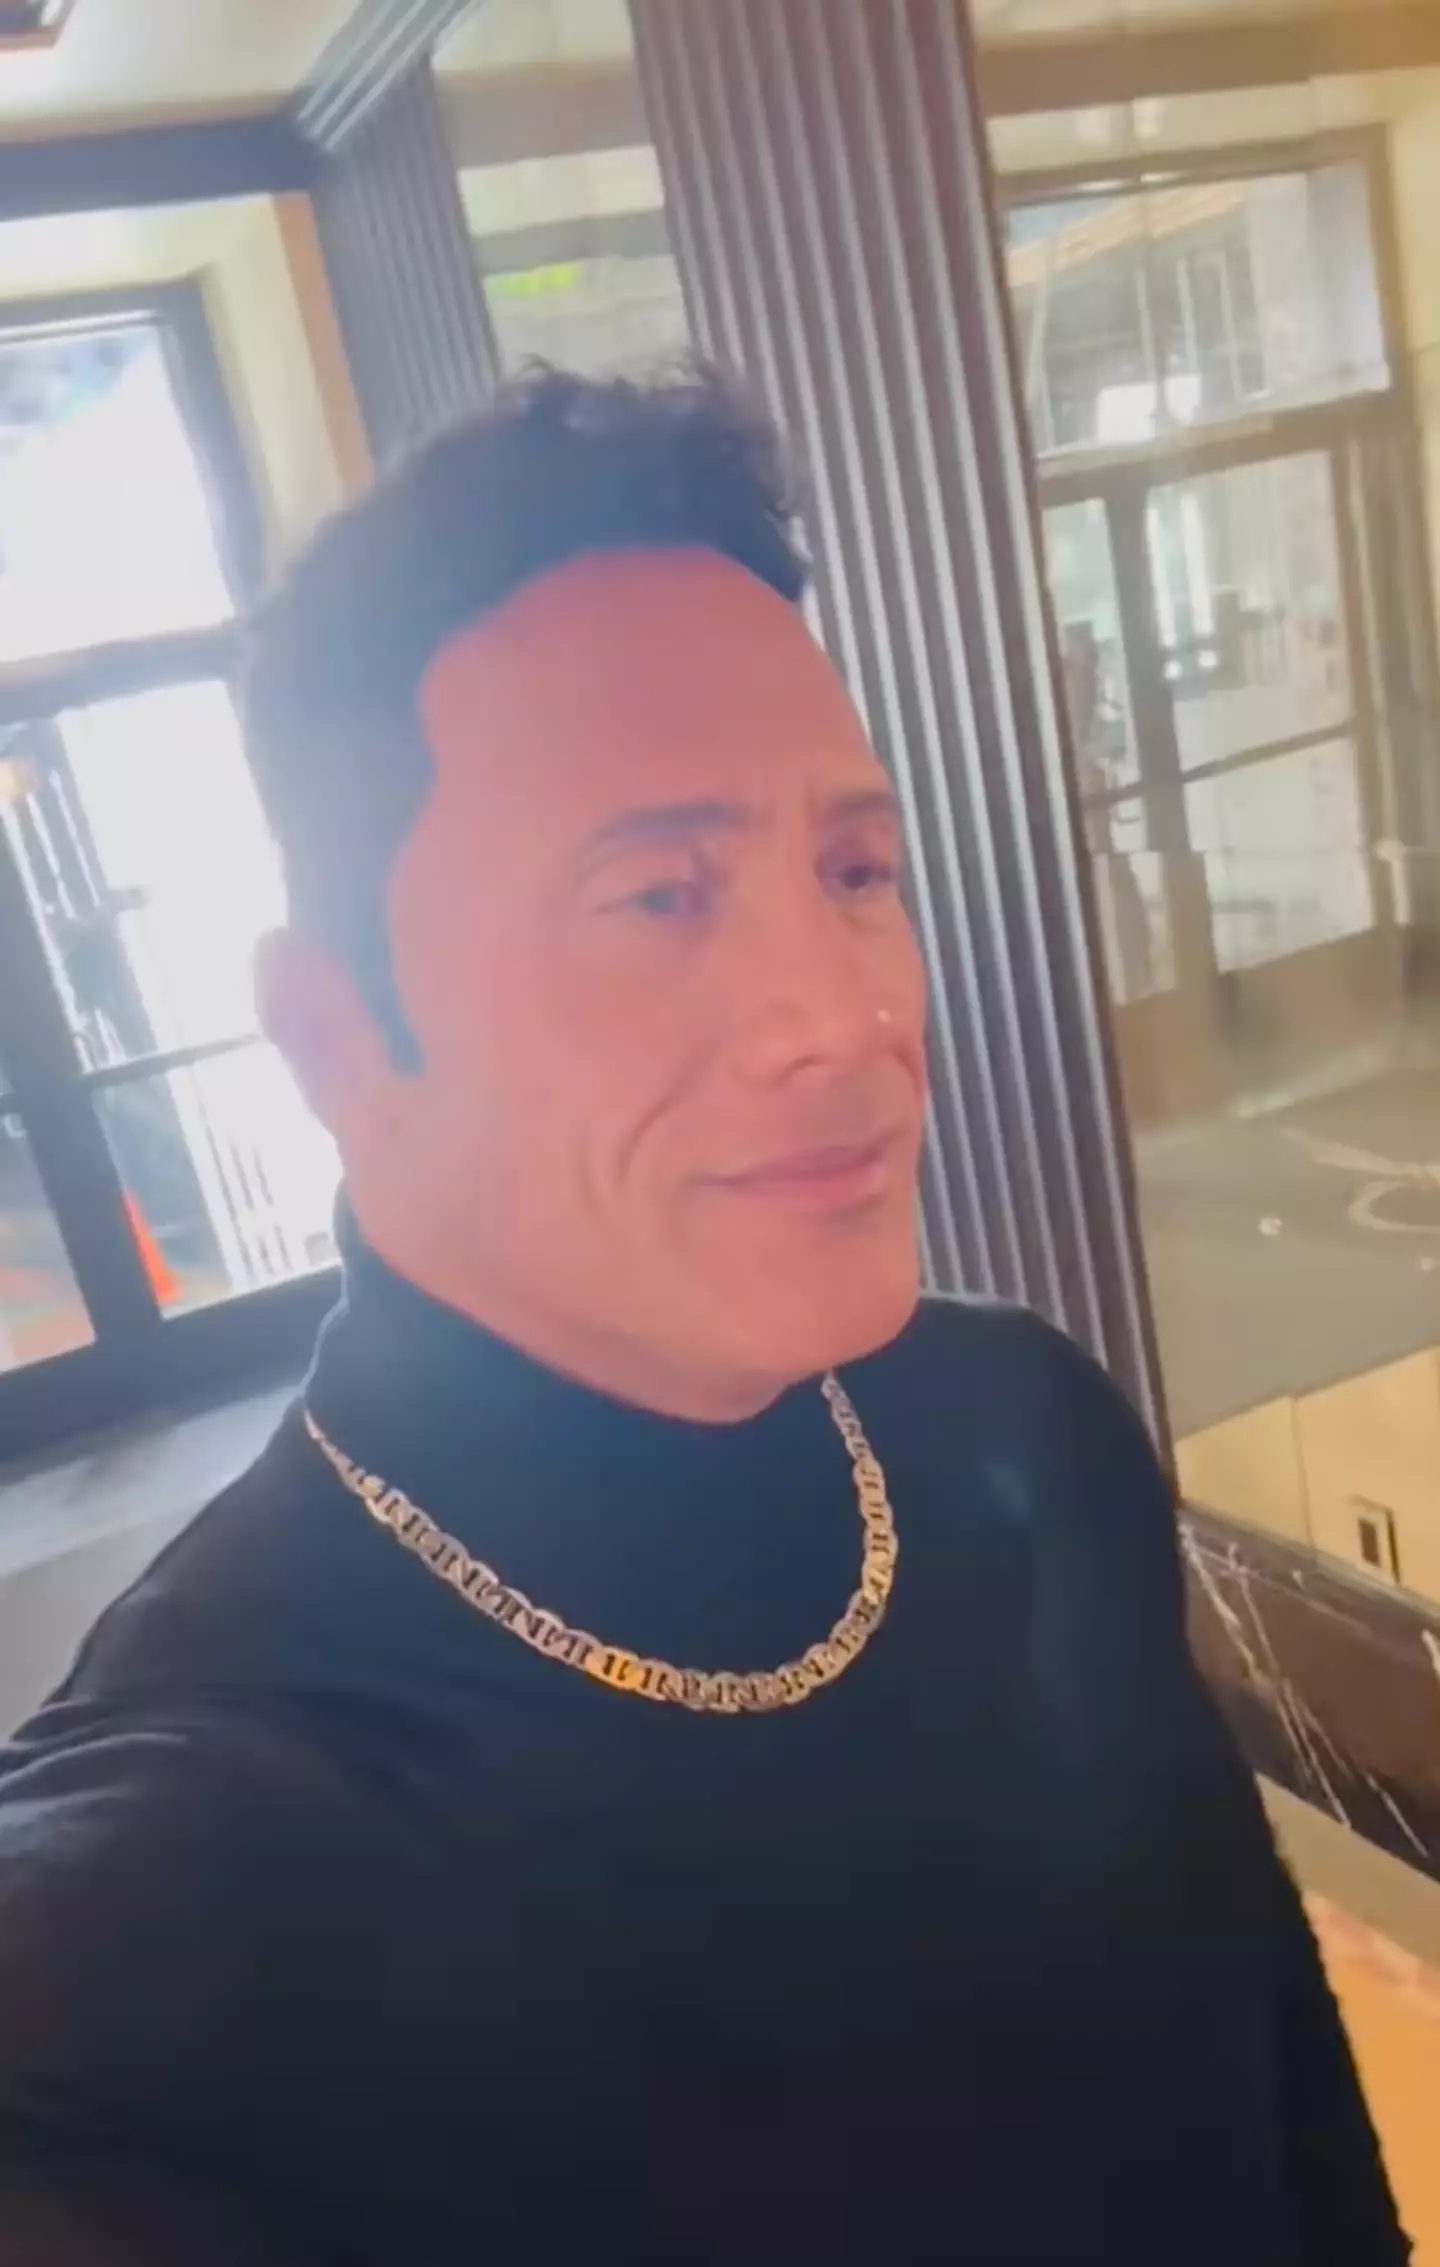 Dwayne Johnson recreated the look for Christmas.